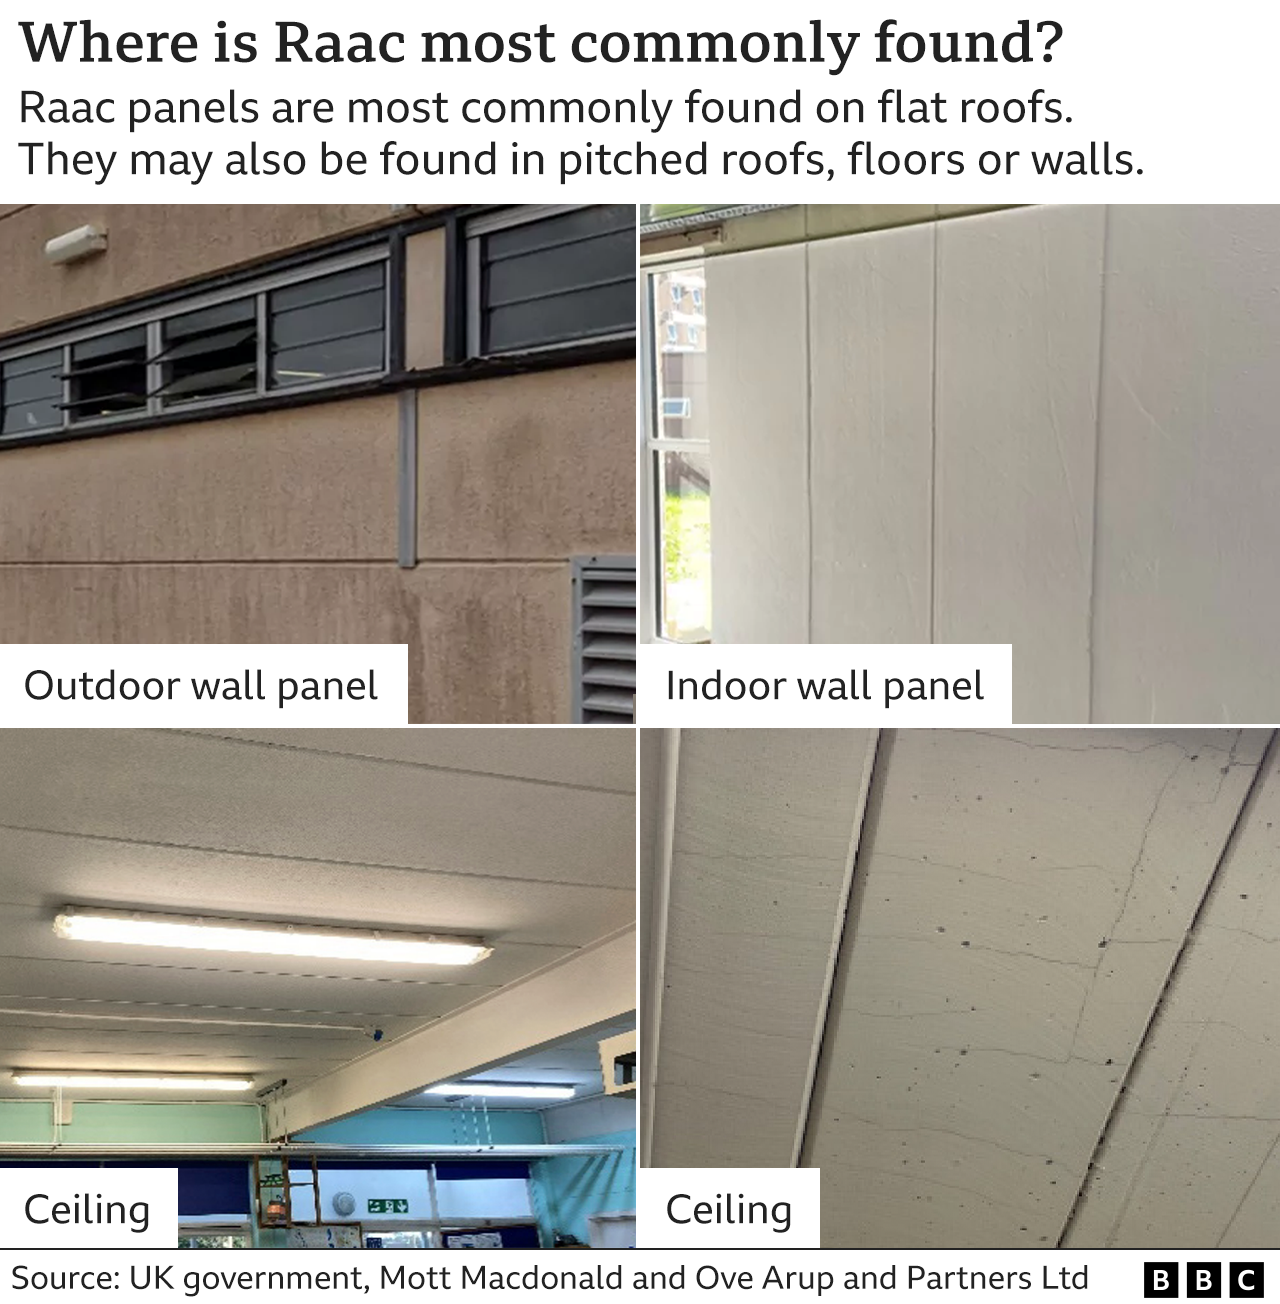 Graphic showing photos of areas where Raac is commonly found, including outdoor wall panels, indoor wall panels, and in ceilings.